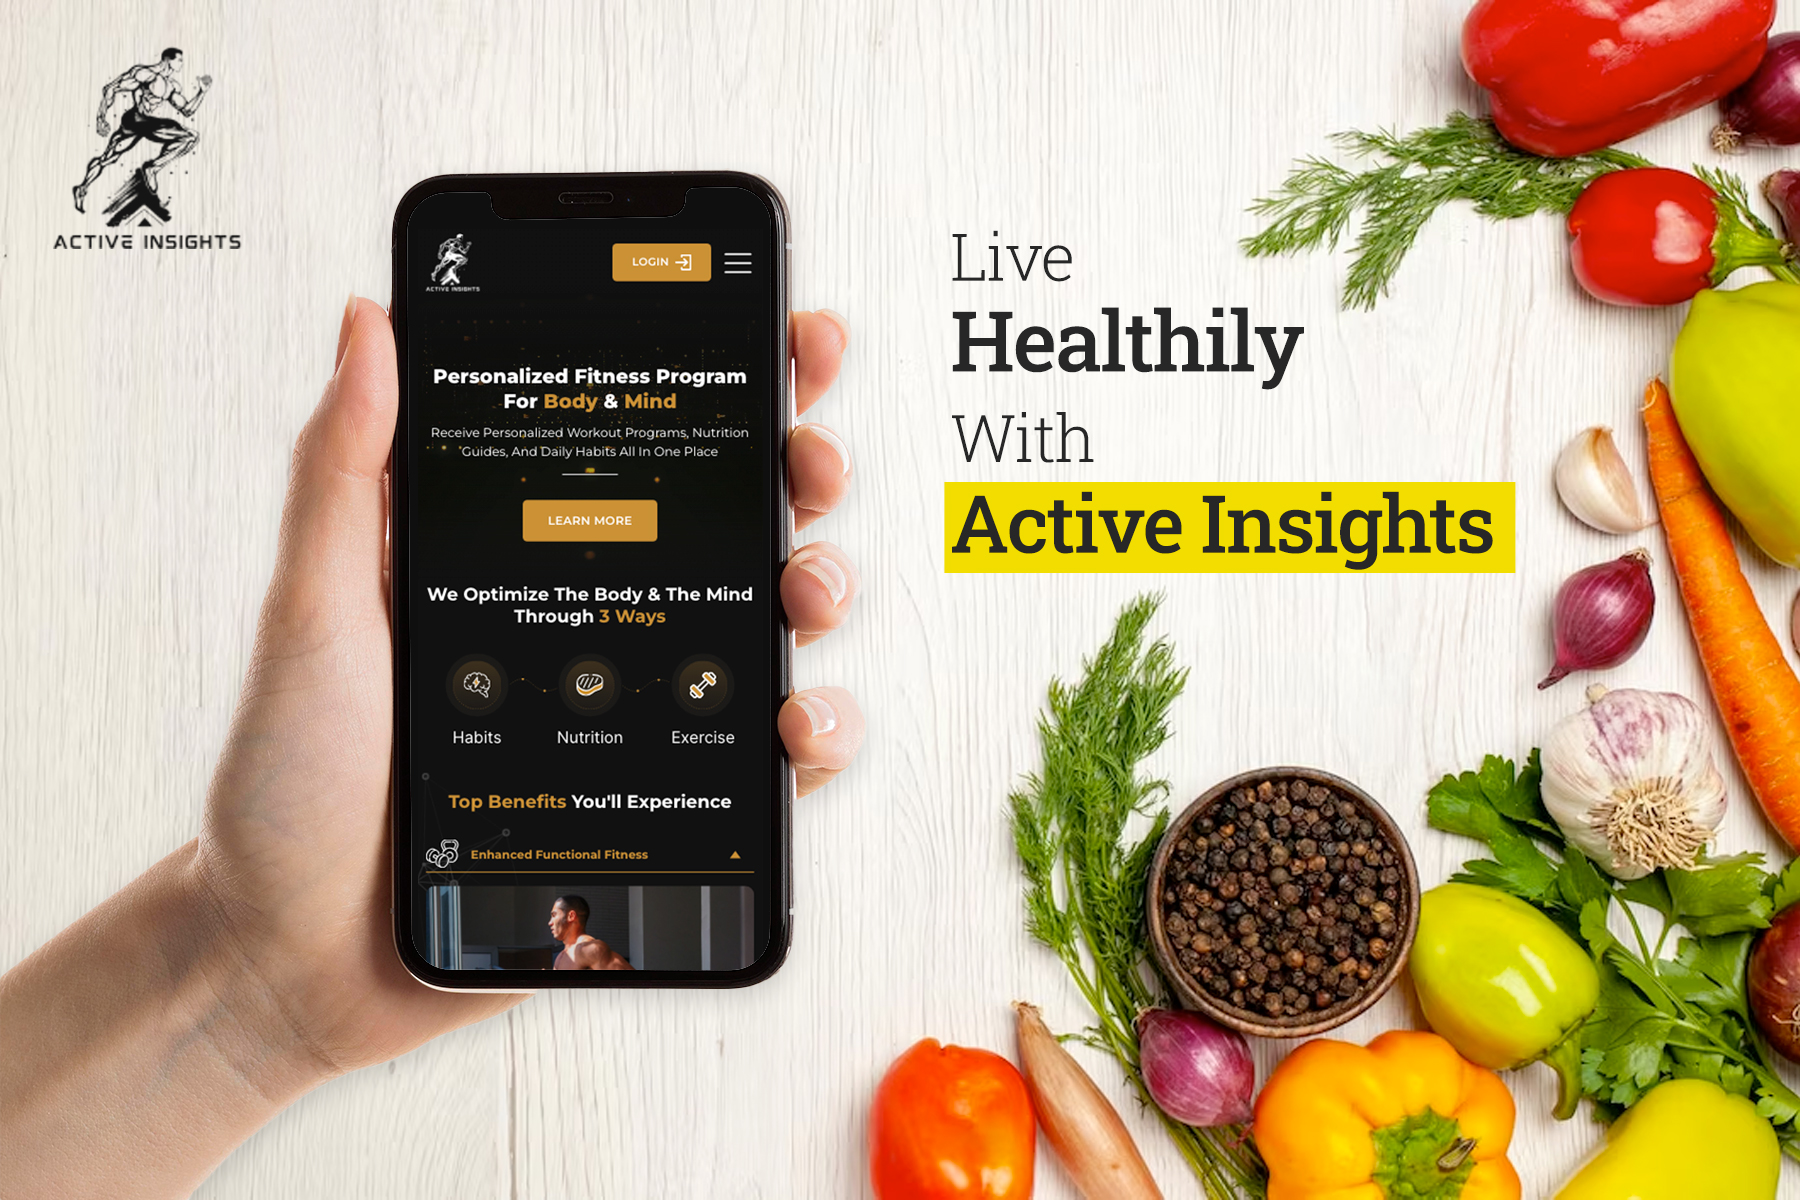 Live Healthily With Active Insights